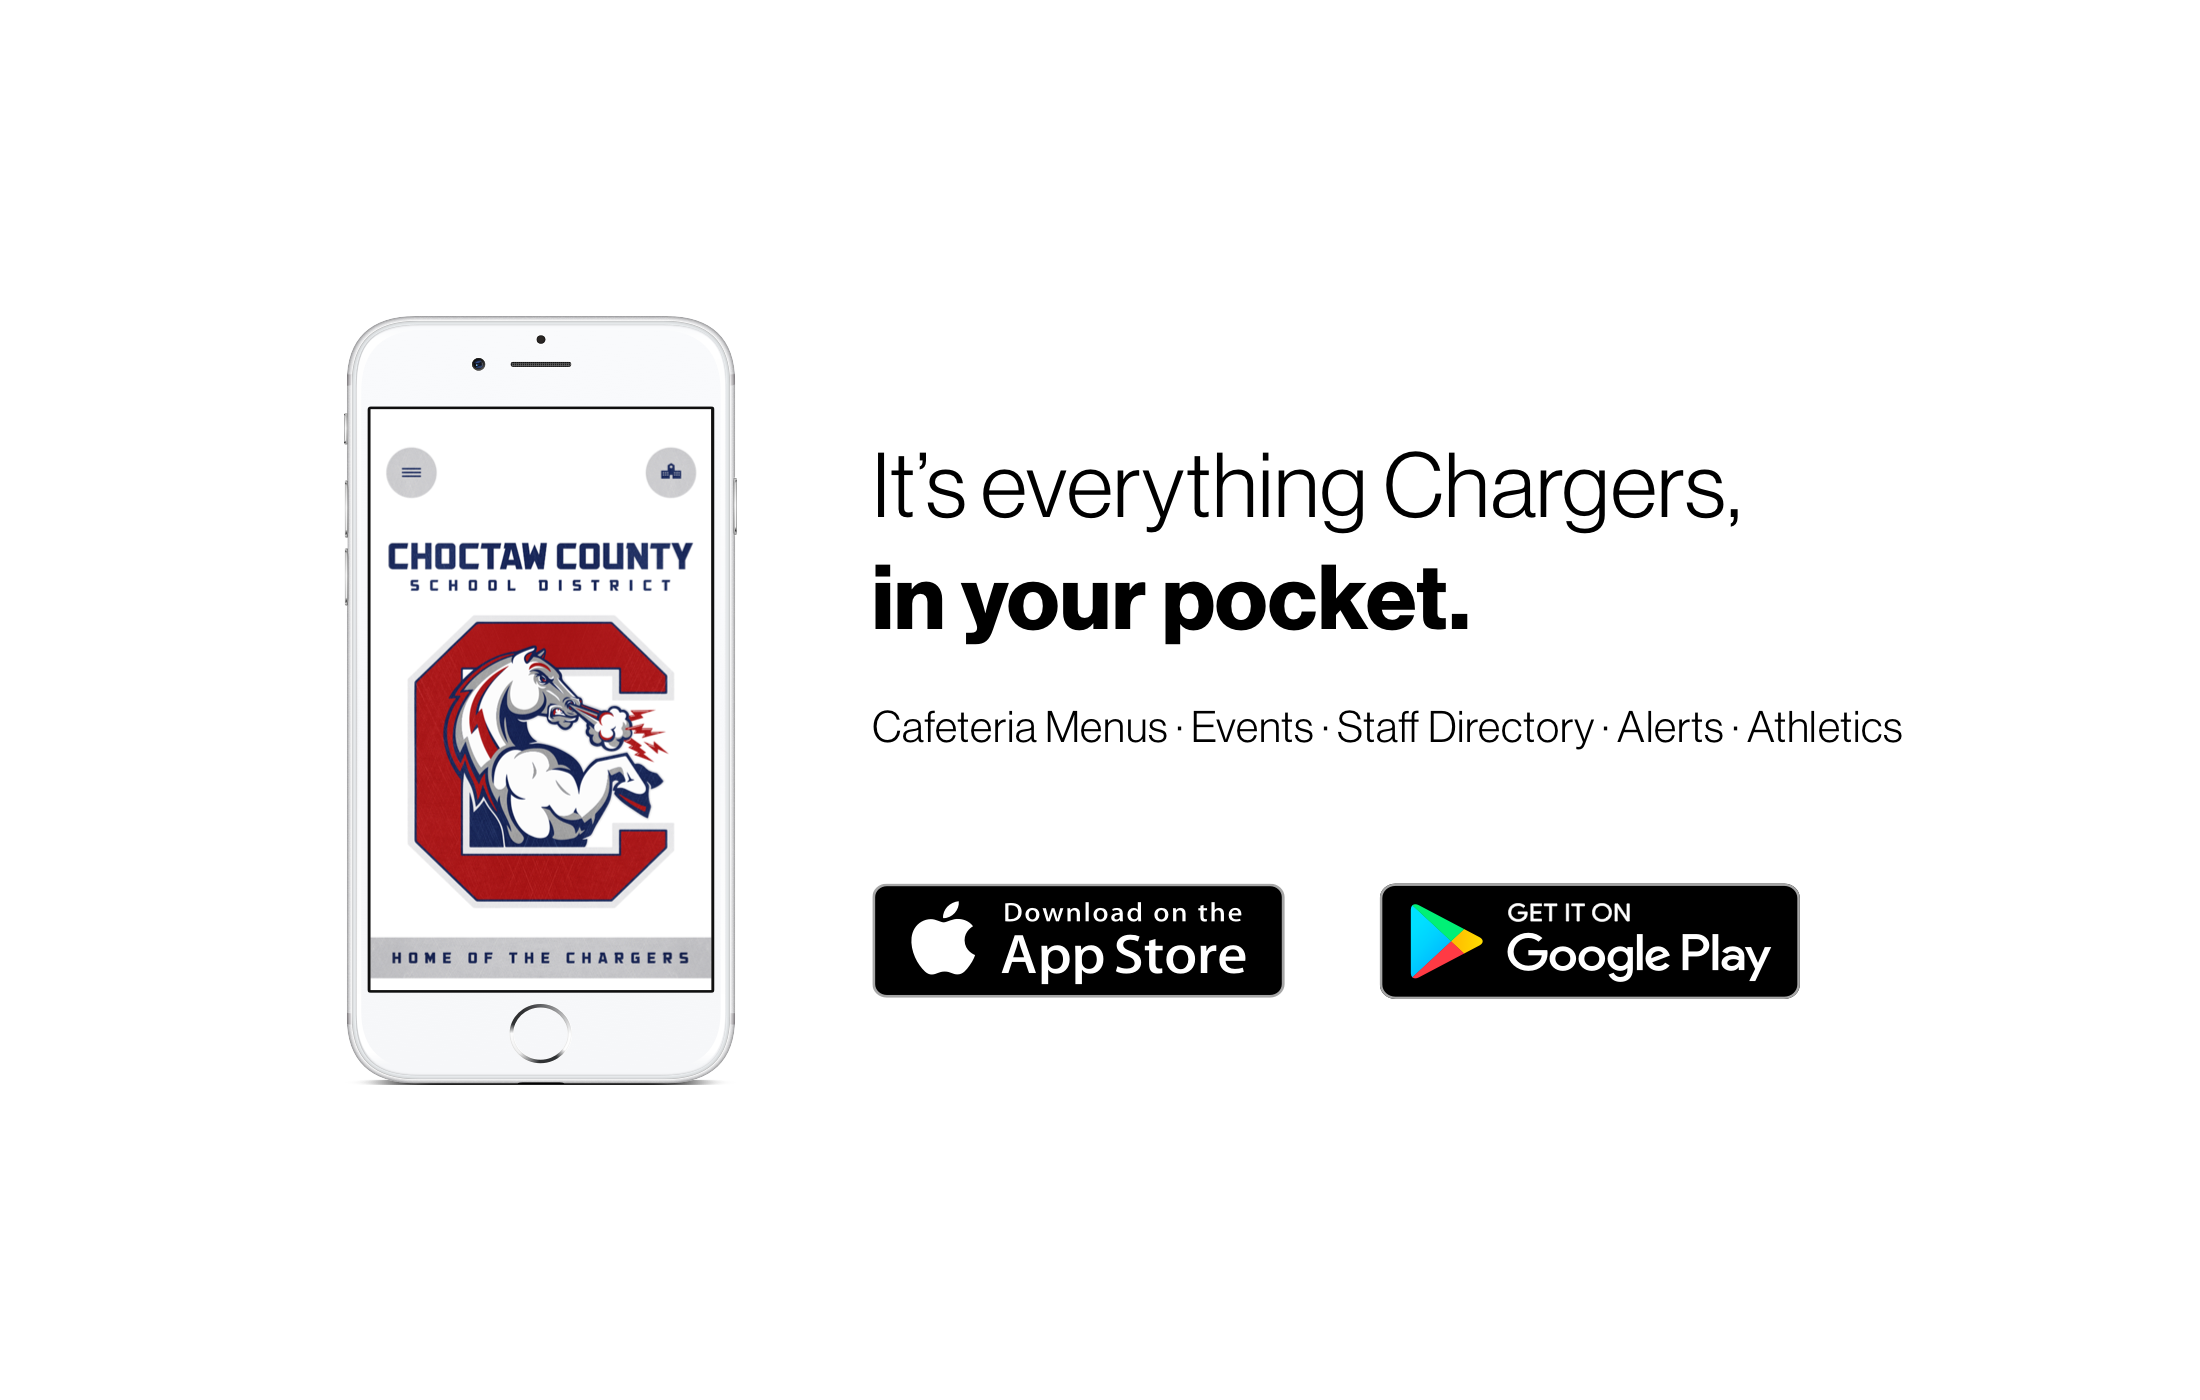 it's everything chargers in your pocket